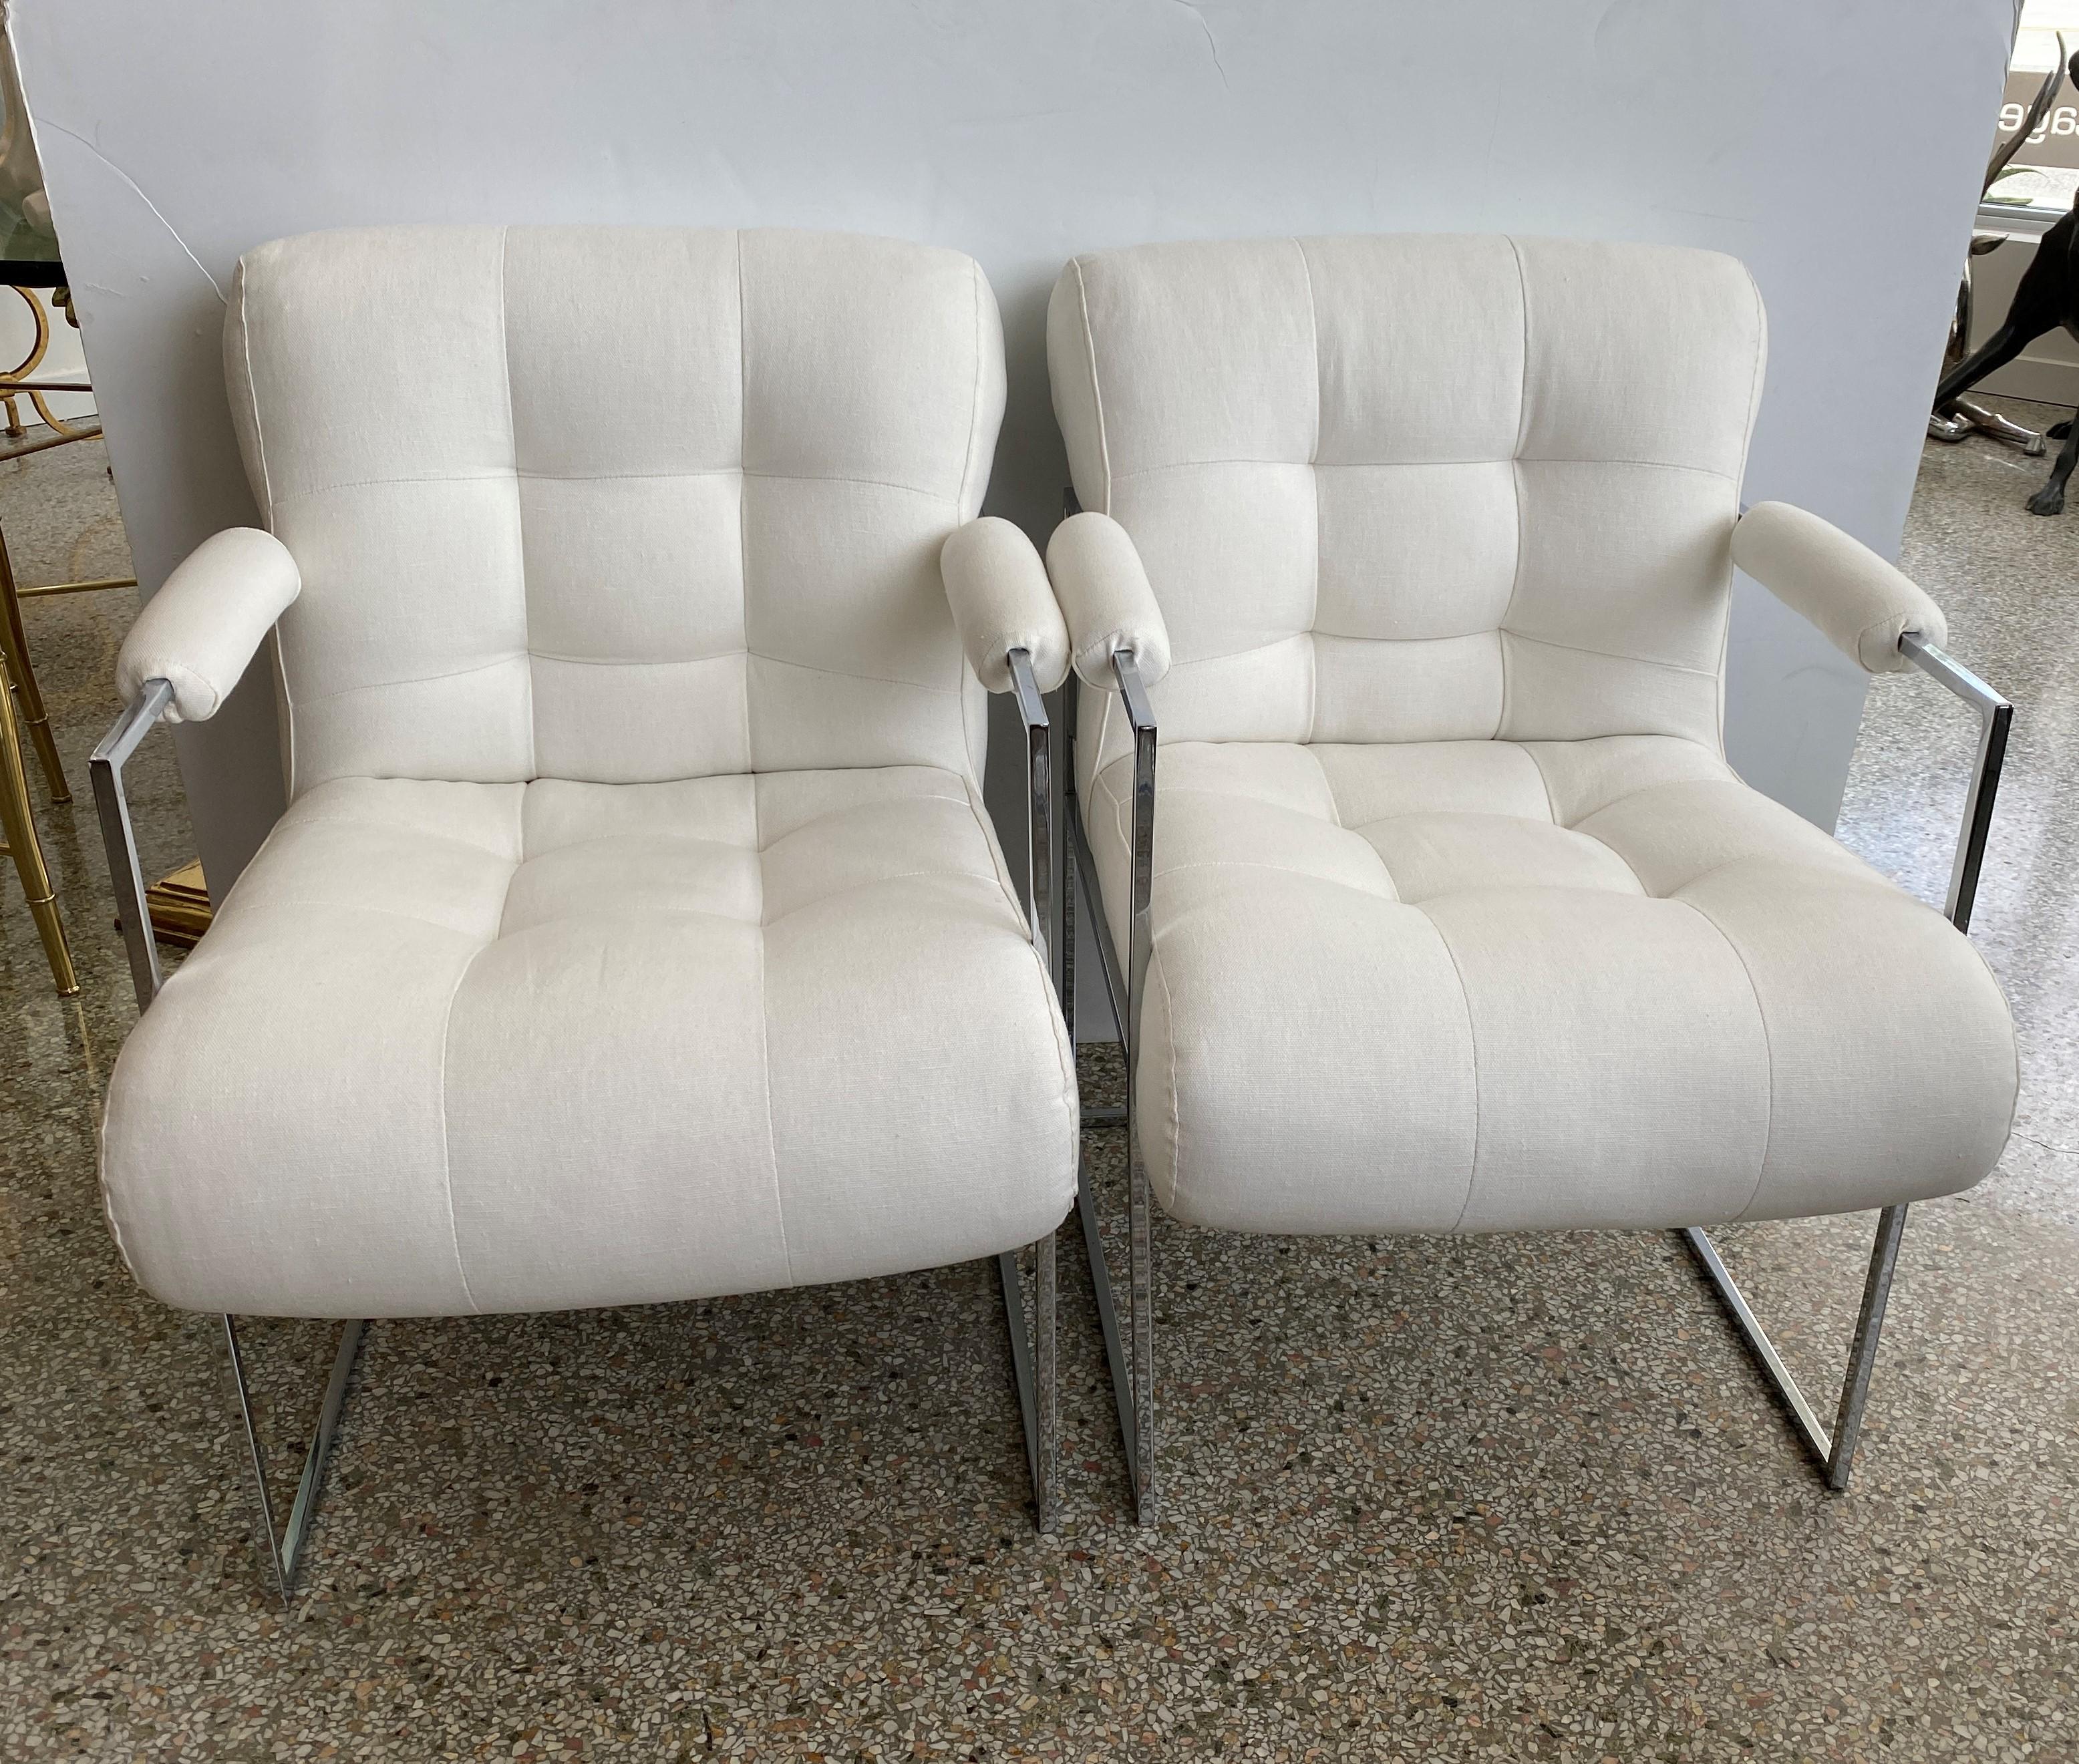 This stylish pair of 1970s chairs were designed by Milo Baughman for his 